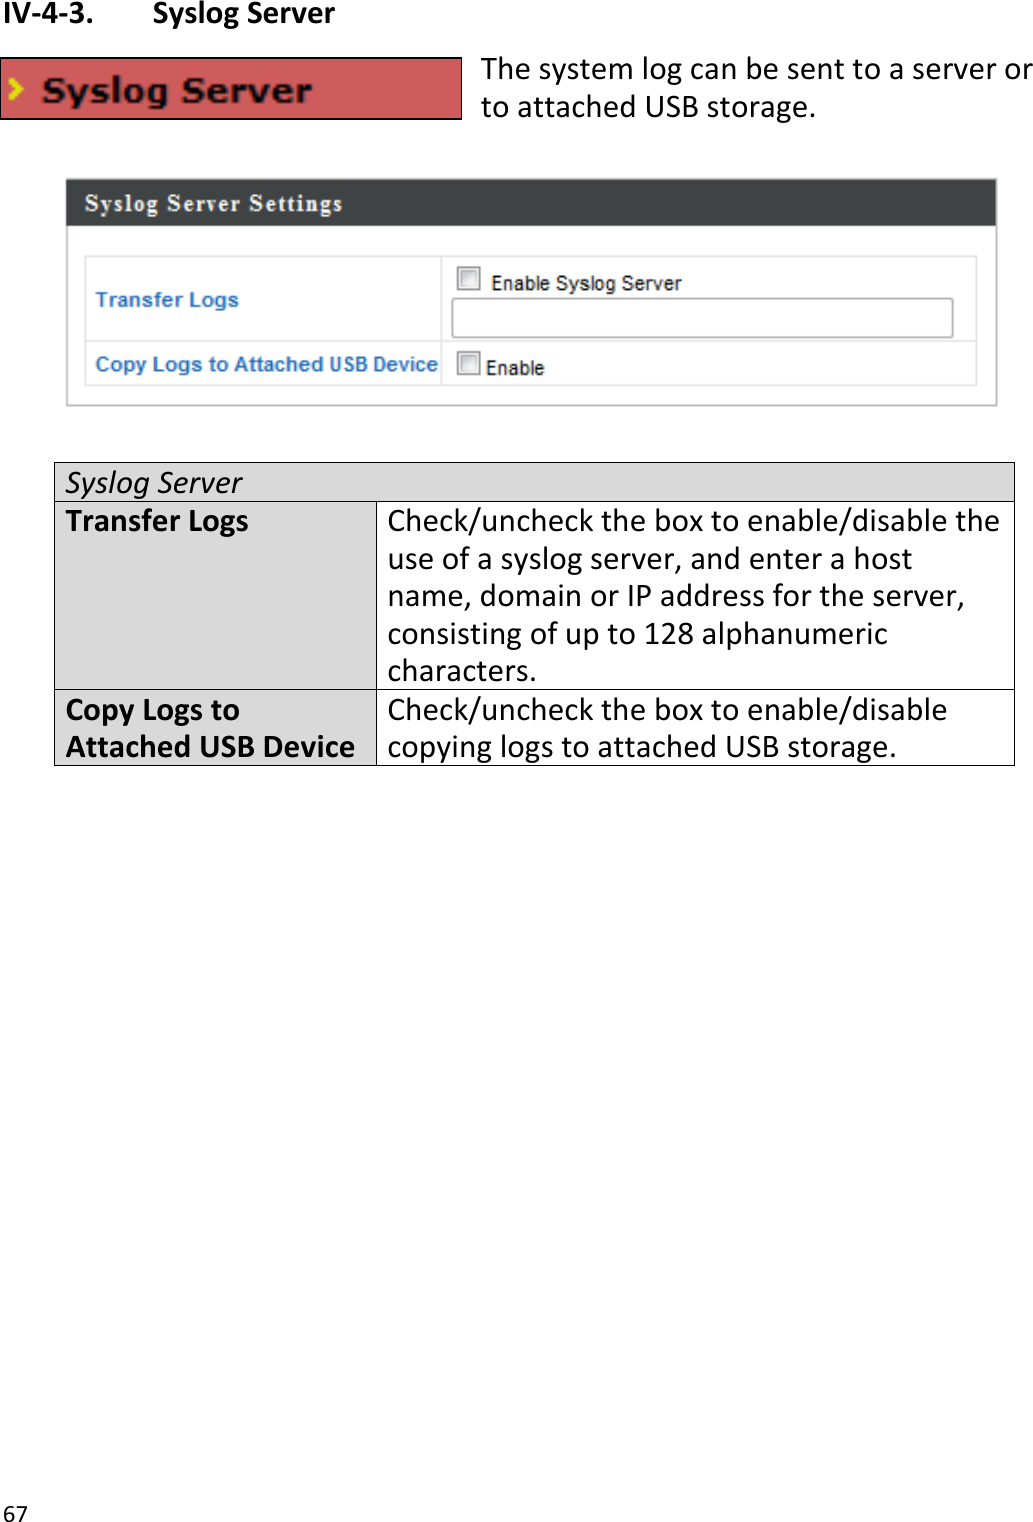 67  IV-4-3.   Syslog Server The system log can be sent to a server or to attached USB storage.    Syslog Server Transfer Logs Check/uncheck the box to enable/disable the use of a syslog server, and enter a host name, domain or IP address for the server, consisting of up to 128 alphanumeric characters. Copy Logs to Attached USB Device Check/uncheck the box to enable/disable copying logs to attached USB storage.  